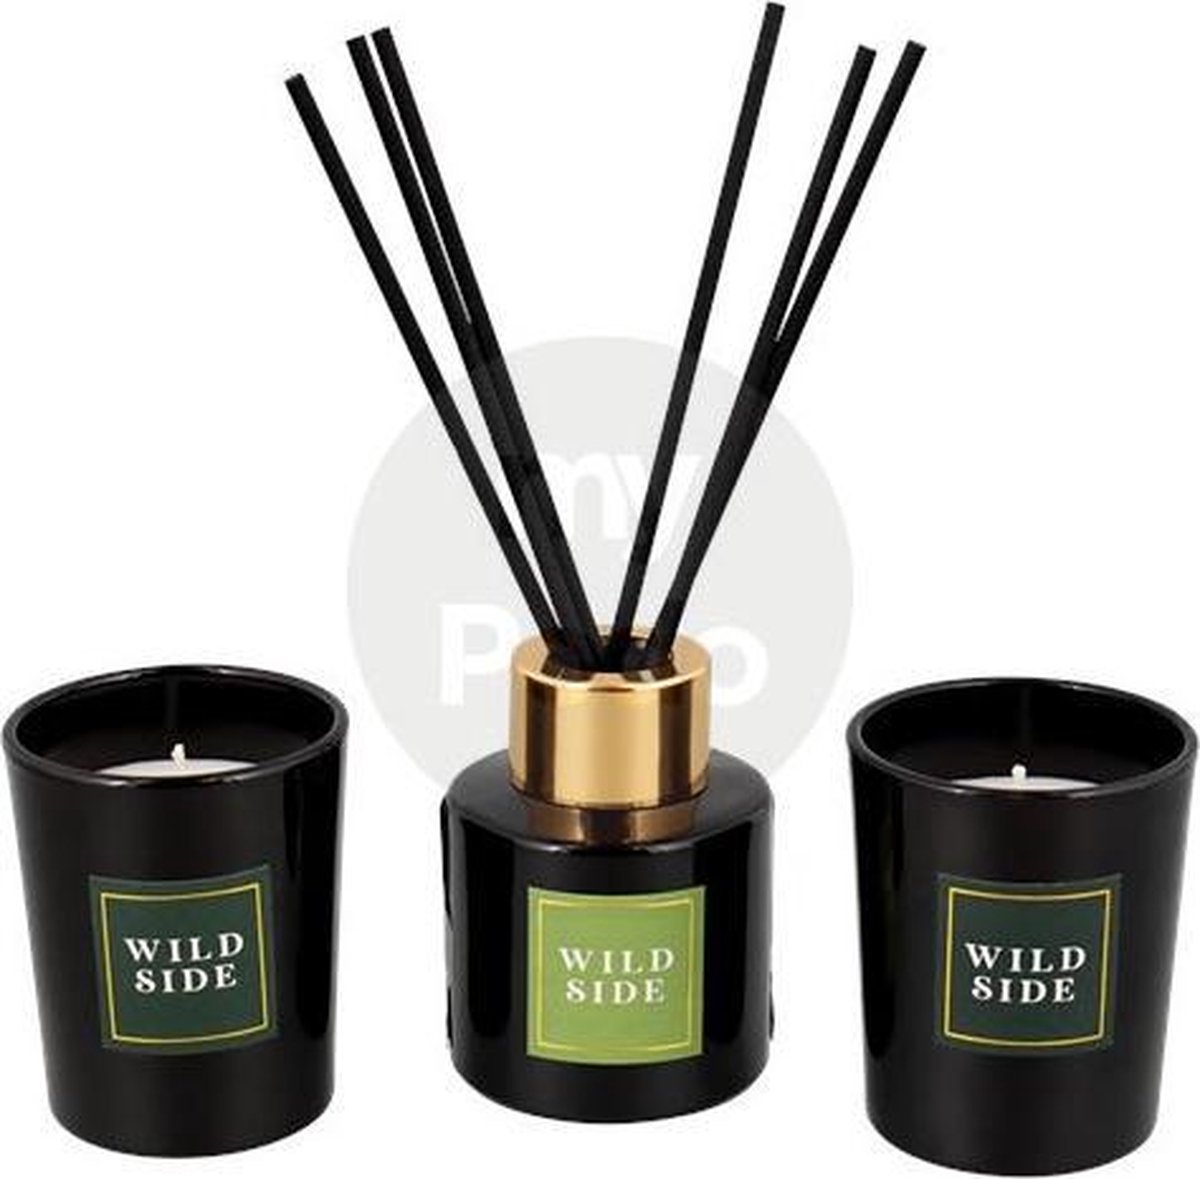 CANDLES AND PERFUME DIFFUSERS